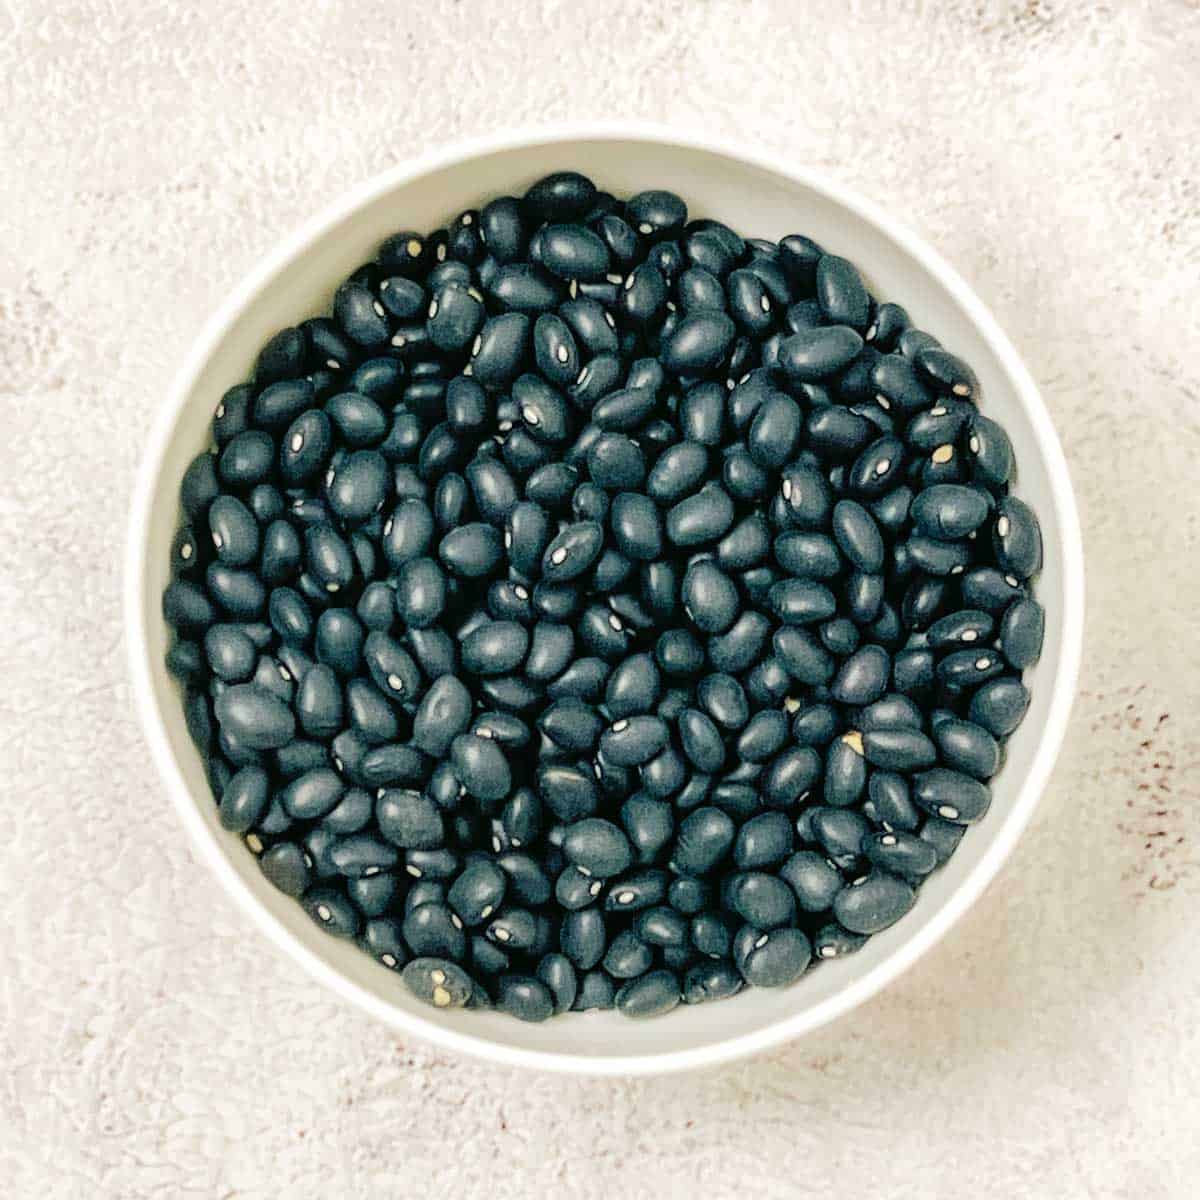 Uncooked dried black beans in a white bowl.